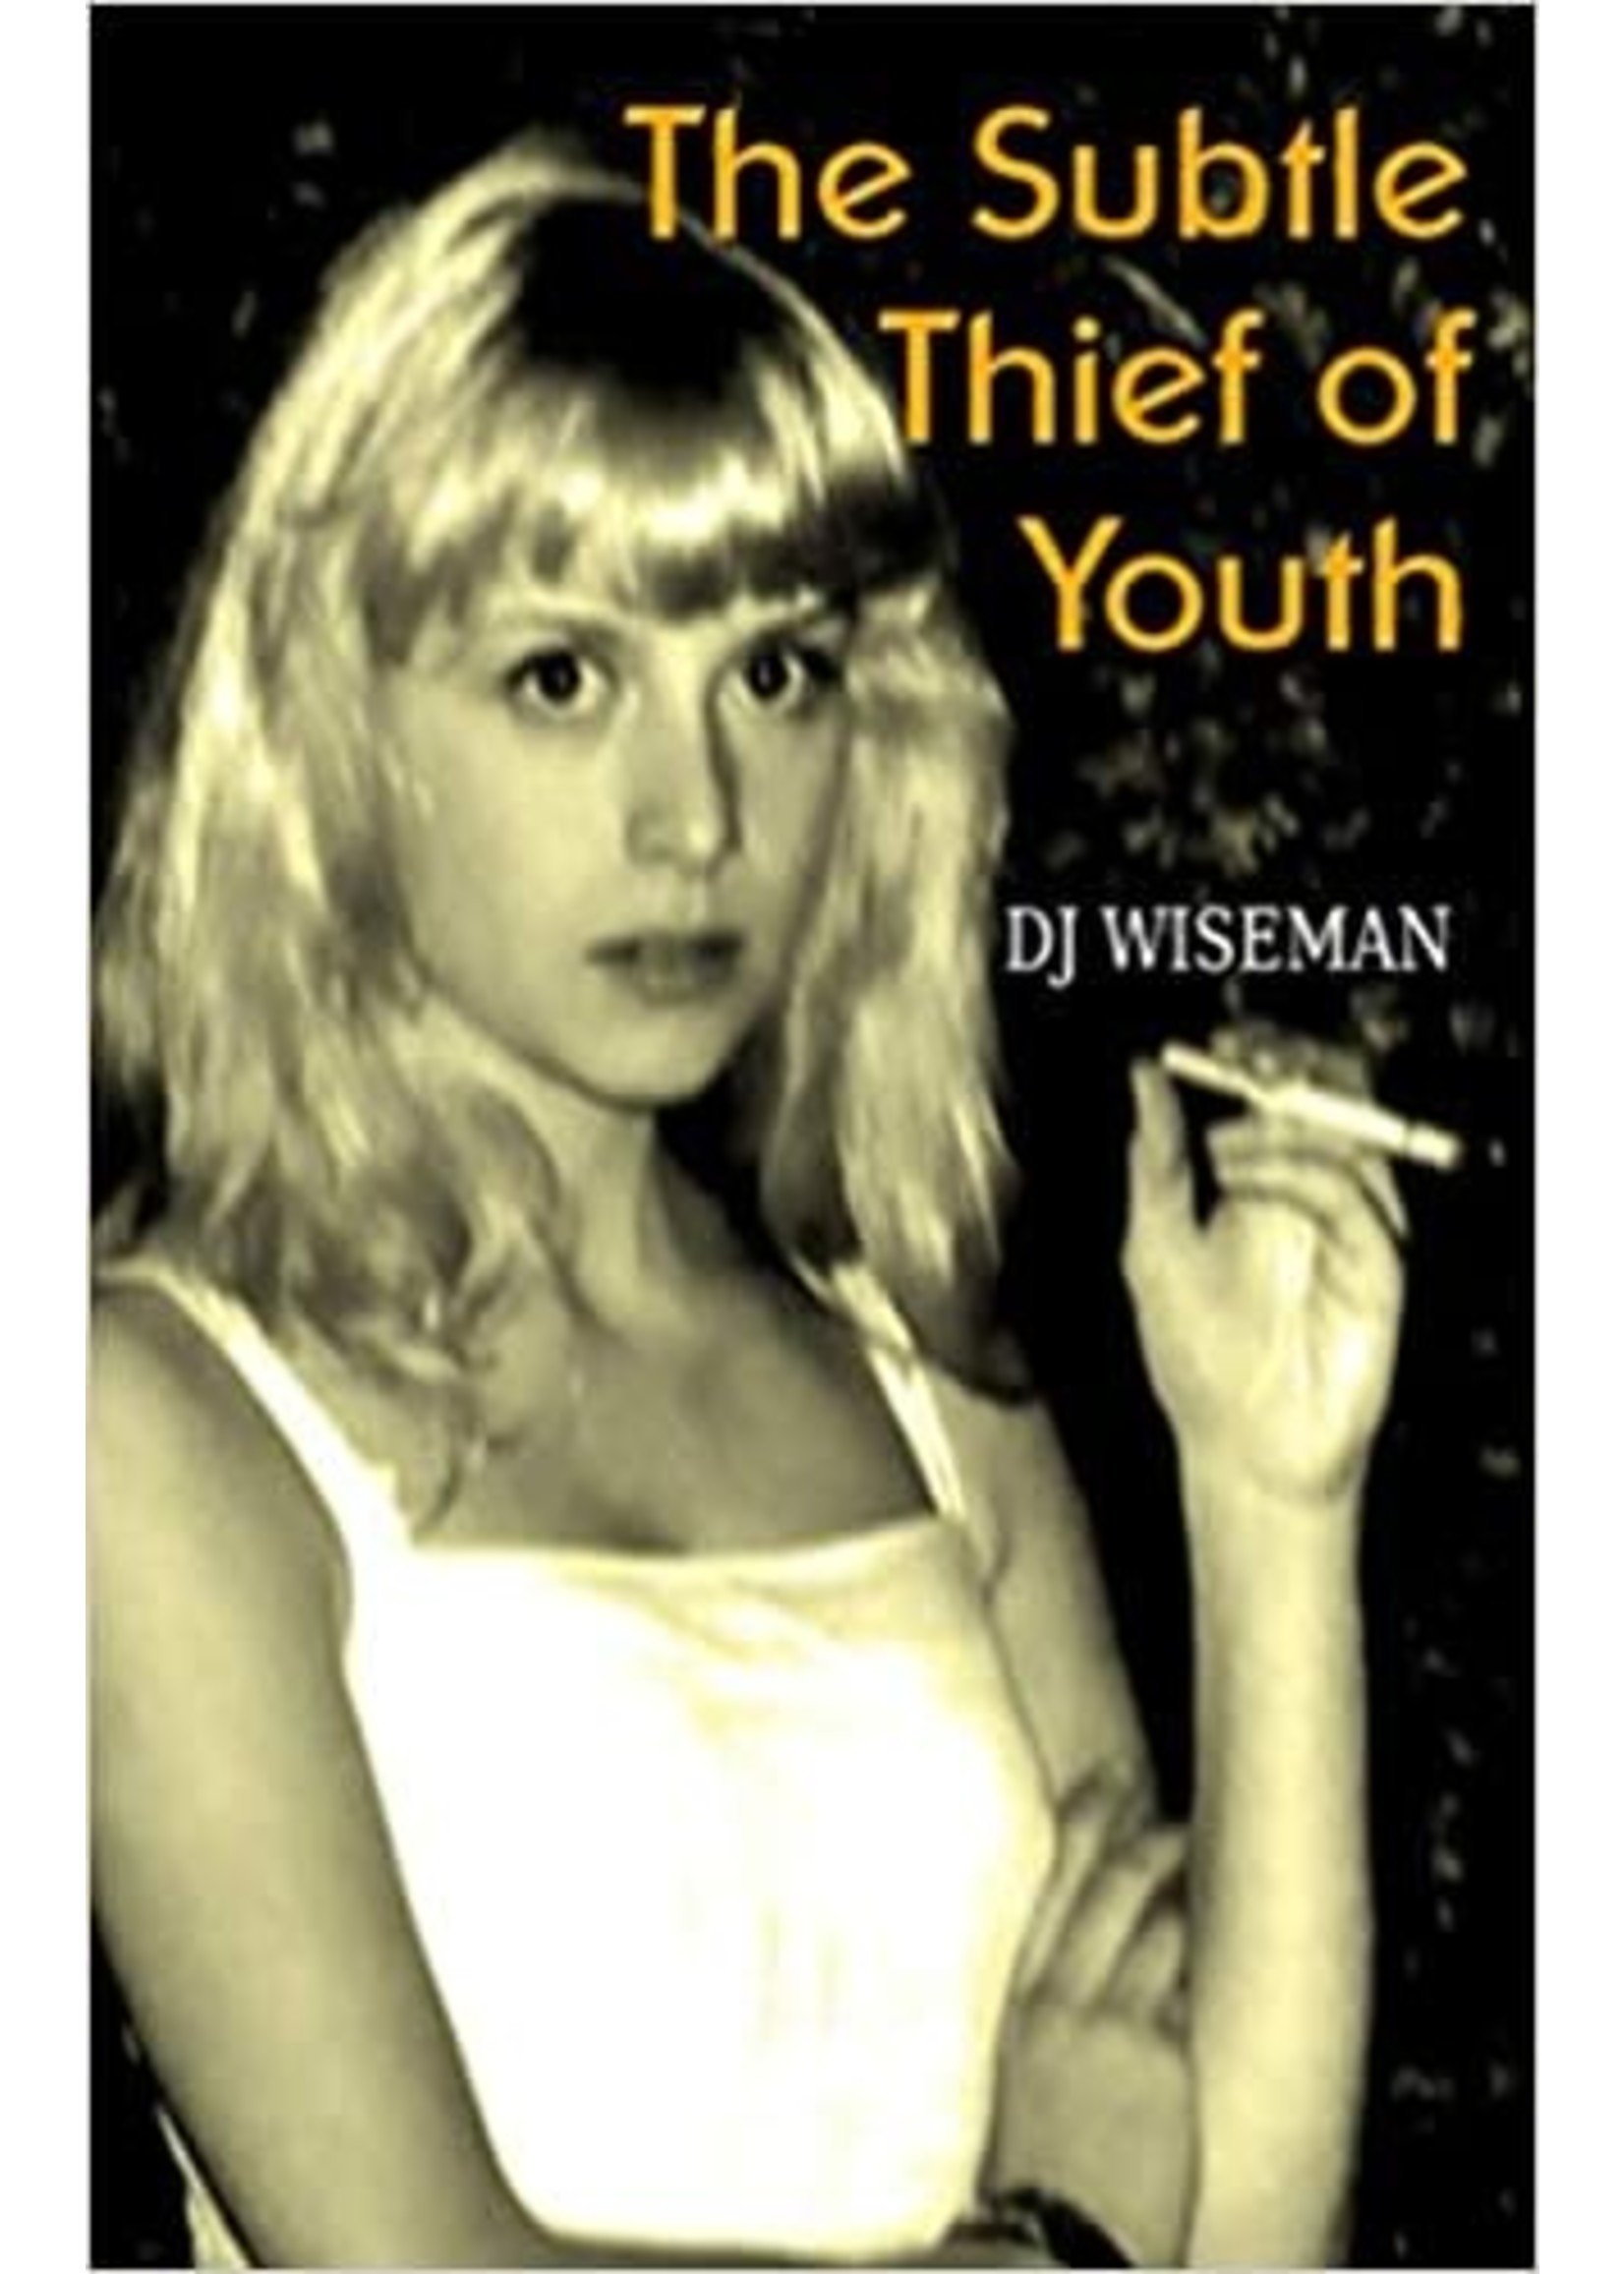 The Subtle Thief of Youth by DJ Wiseman